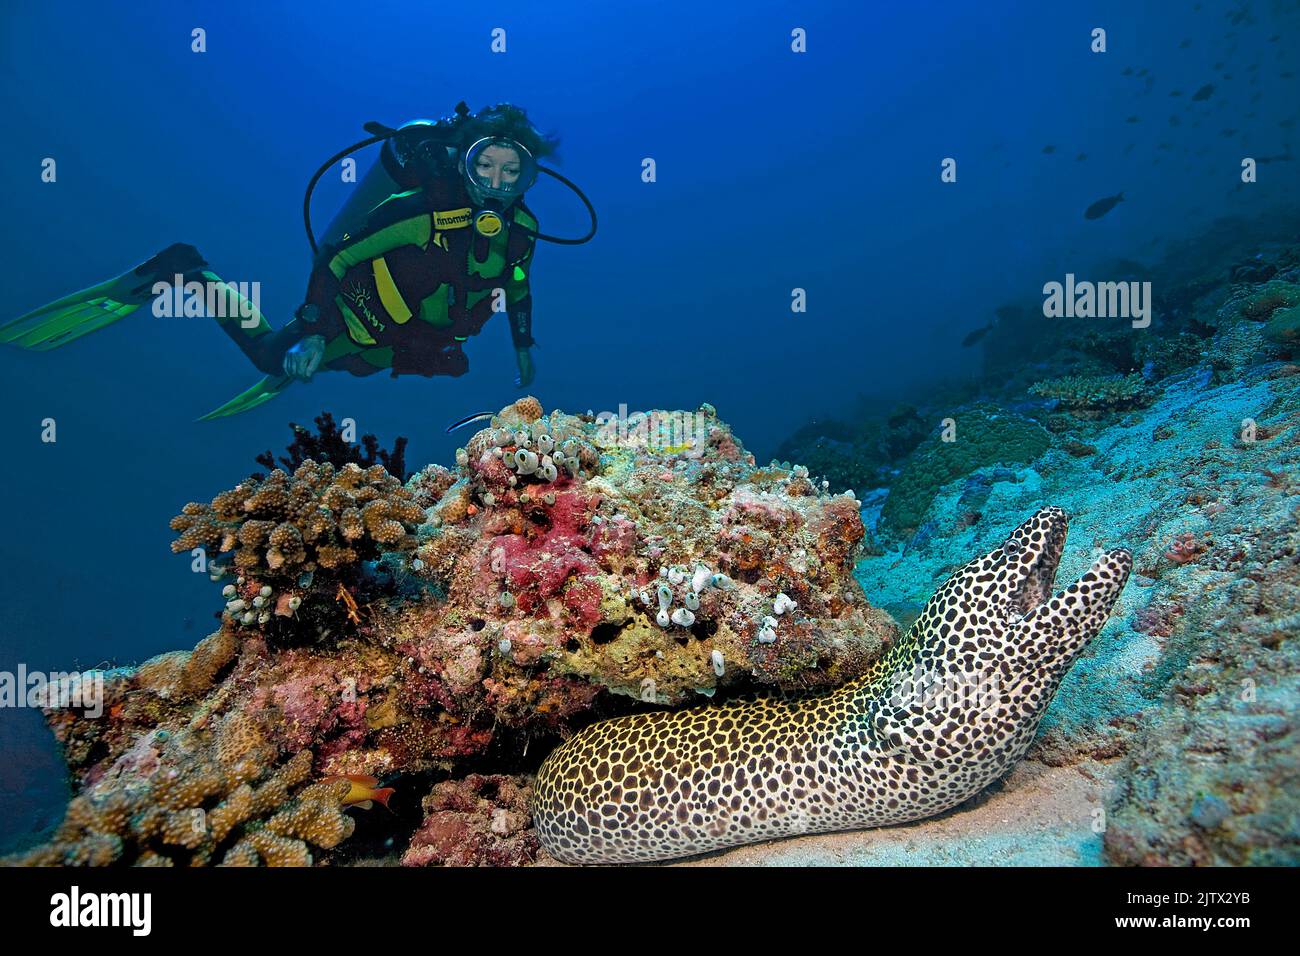 Scuba diver watches a Honeycomb moray, (Gymnothorax favagineus) in a coral reef, Maldives, Indian ocean, Asia Stock Photo